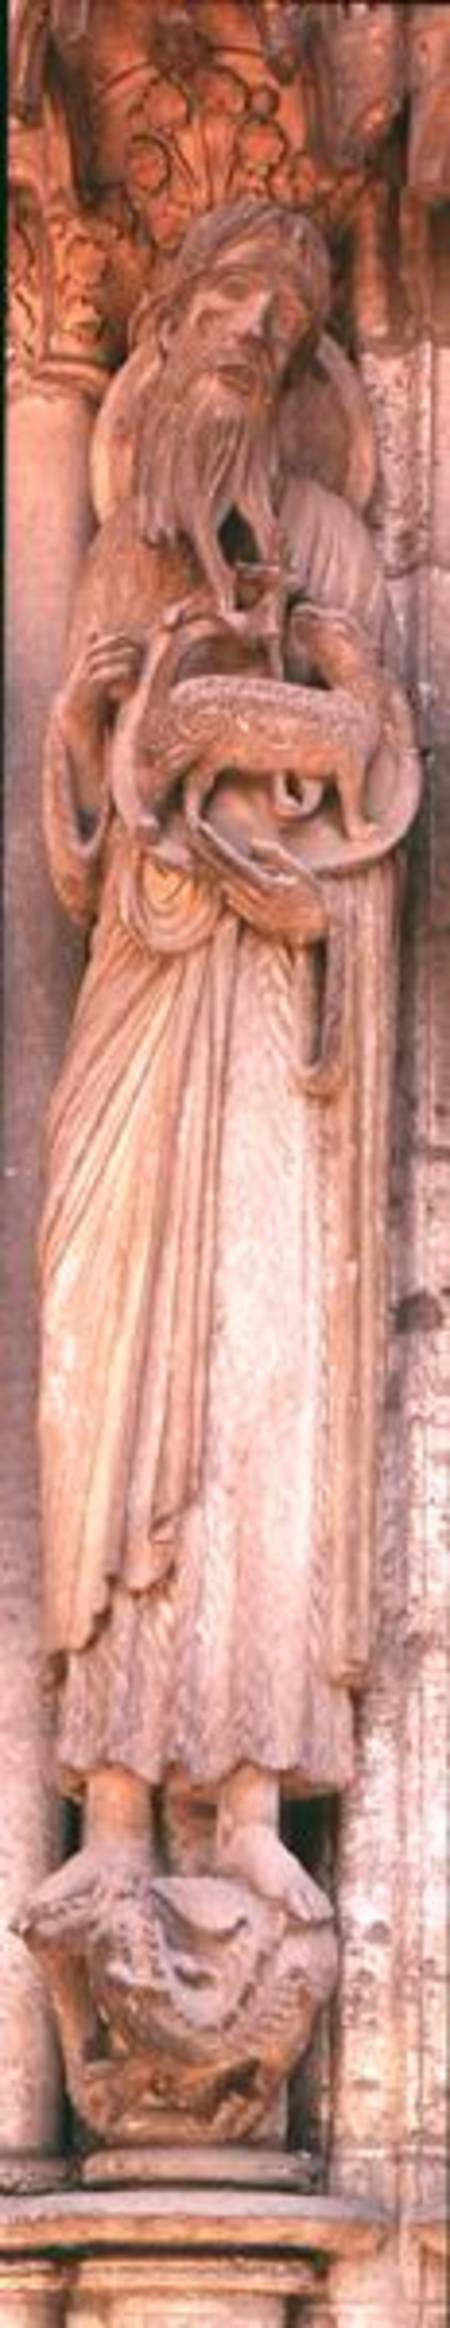 St. John the Baptist, jamb figure from the right hand side of the central door of the north portal from French School